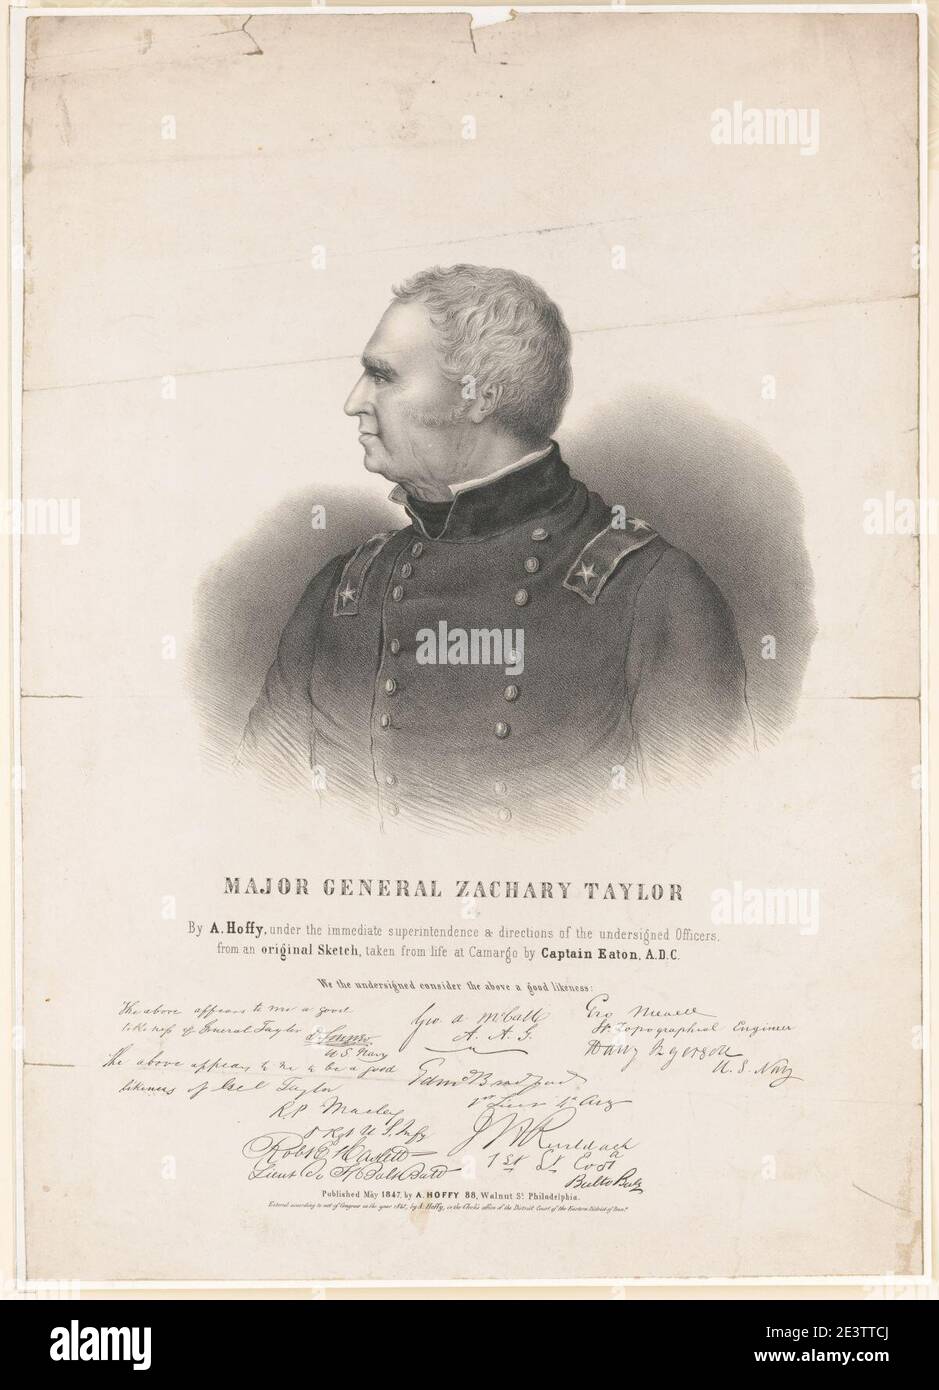 Major General Zachary Taylor - by A. Hoffy, under the immediate superintendence & directions of the undersigned officers, from an original sketch taken from life at Camargo by Captain Eaton, Stock Photo